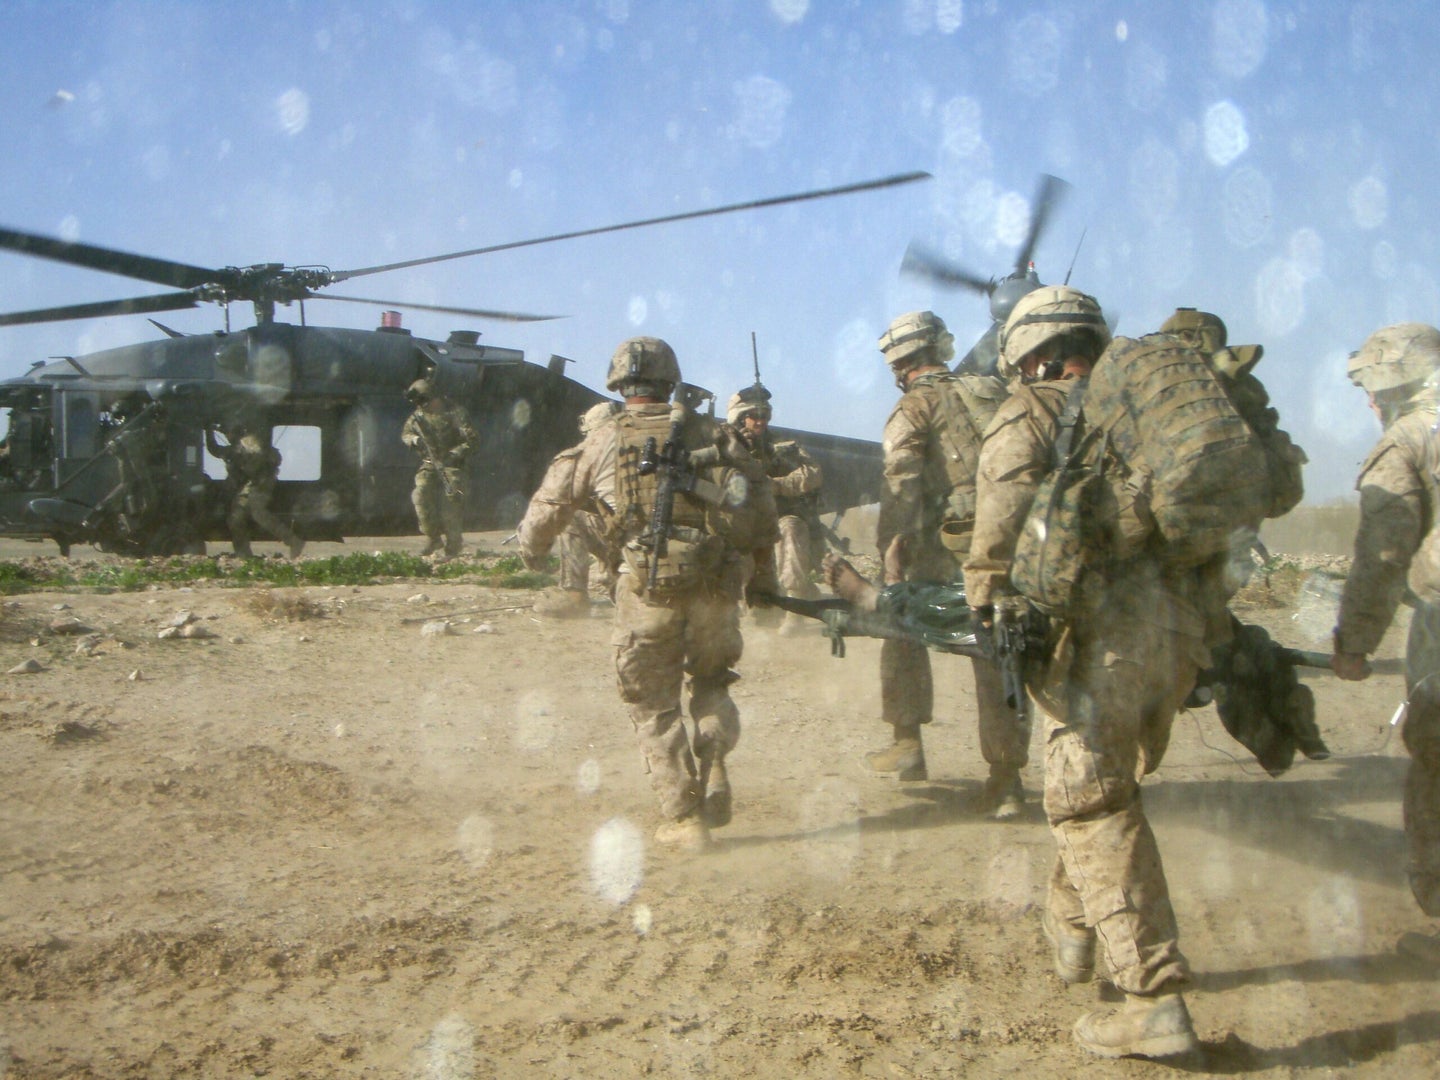 U.S. Marines and corpsmen with 3rd Platoon, Company I, Battalion Landing Team 3/8, Regimental Combat Team 8, medically evacuate Afghan civilian Ghamay Ghilgi, brought to 3rd Platoon's patrol base in Kakar village, Helmand province, Afghanistan, March 7, 2011, onto an International Security Assistance Force helicopter. Ghamay, a local farmer, was injured by an insurgency improvised explosive device. The Marines and sailors see locals approaching them for help as a positive sign of eroding support for the  insurgency. Elements of 26th Marine Expeditionary Unit deployed to Afghanistan to provide regional security in Helmand province in support of the International Security Assistance Force. (Photo by: Lance Cpl. Kevin Hassett)